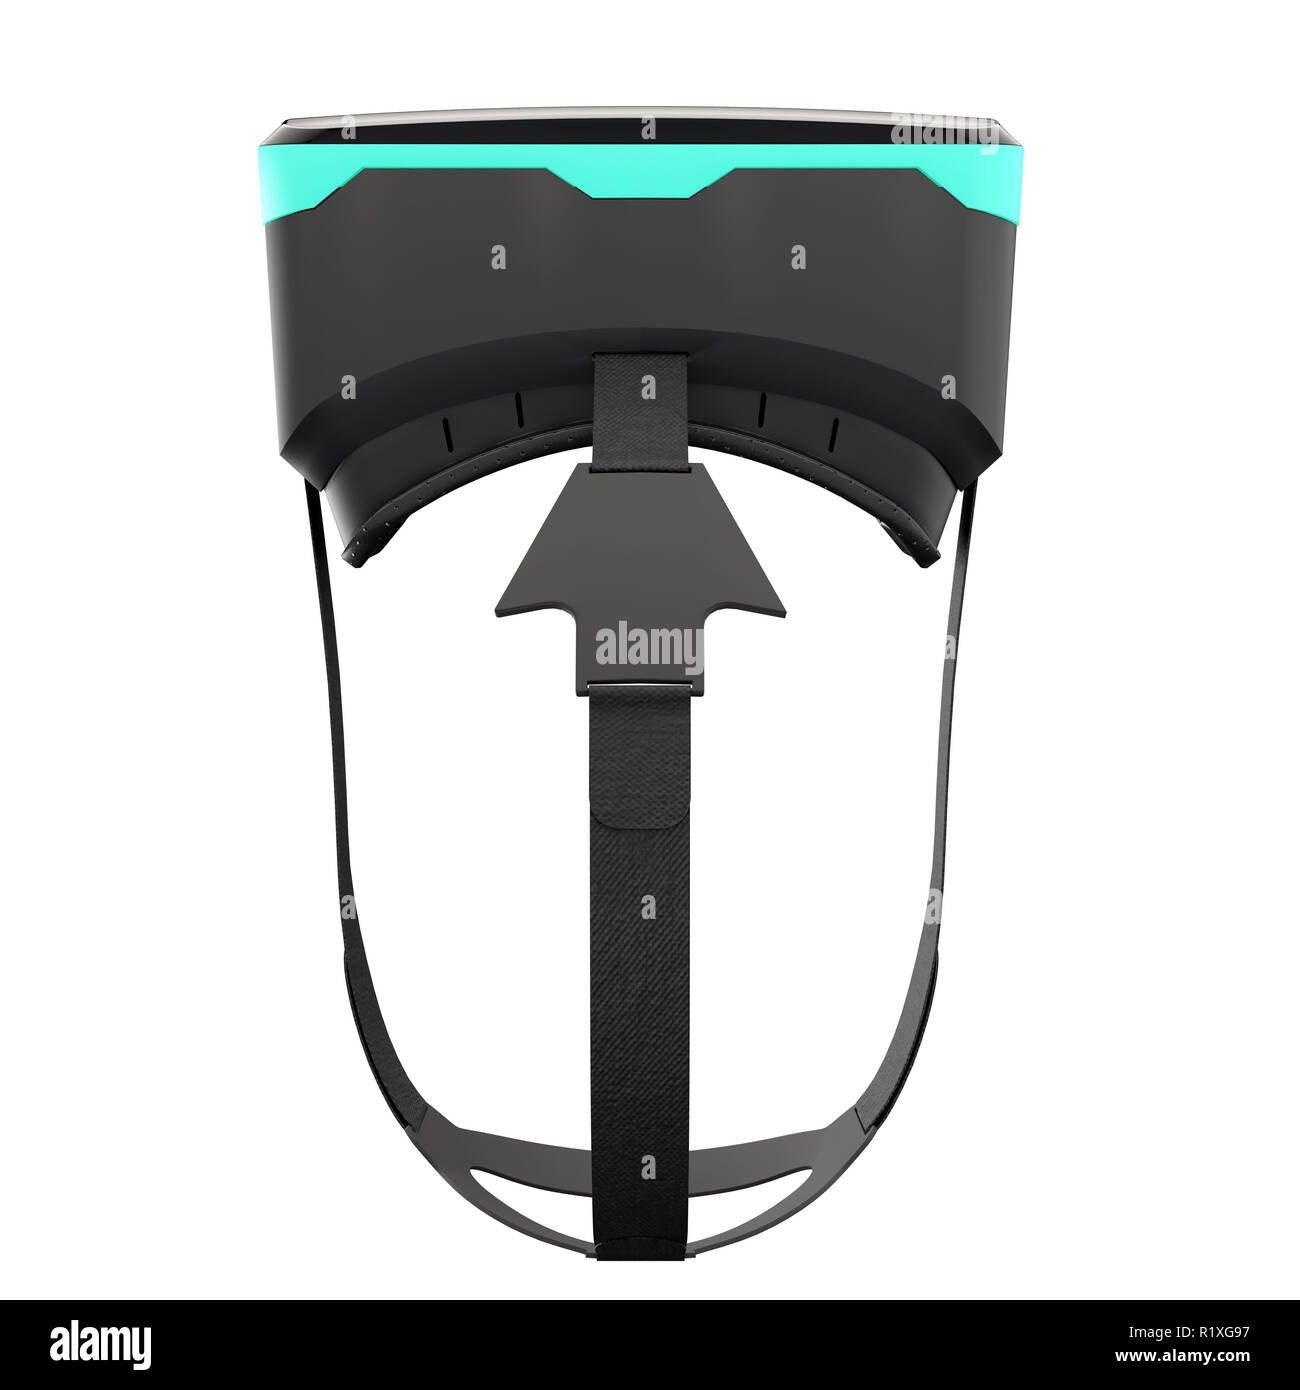 VR Goggles Headset Isolated Stock Photo